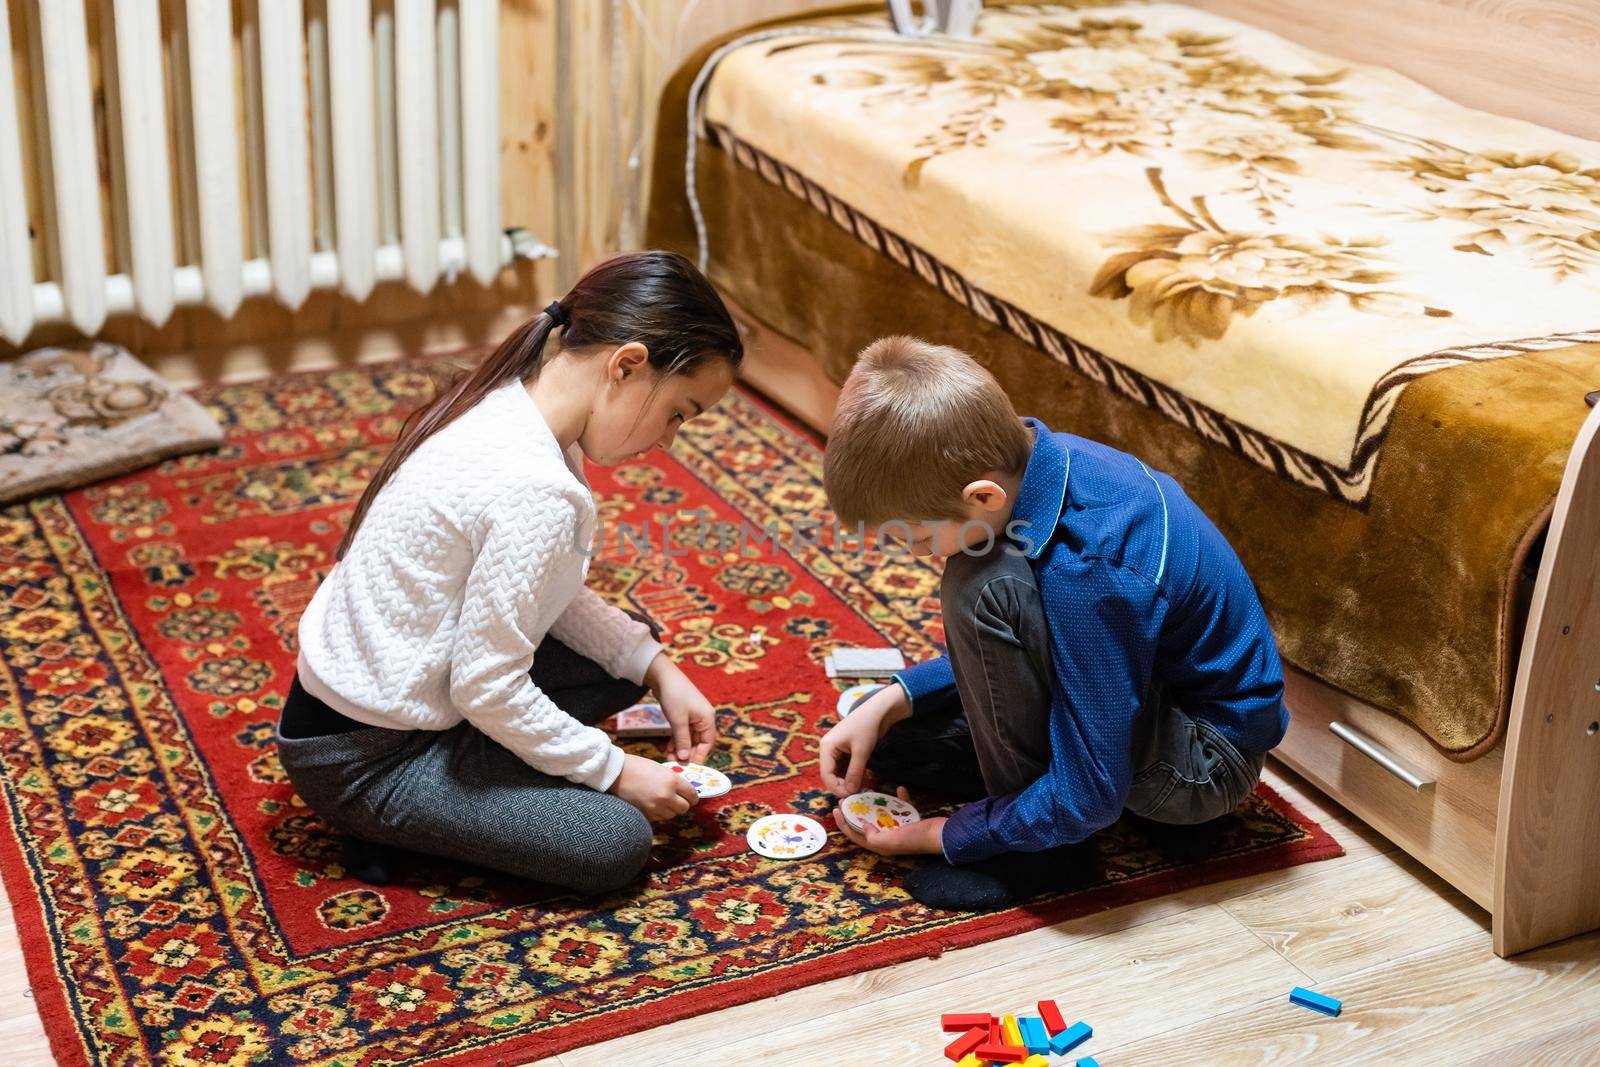 Children playing with blocks on the floor - focus on the boy's face.